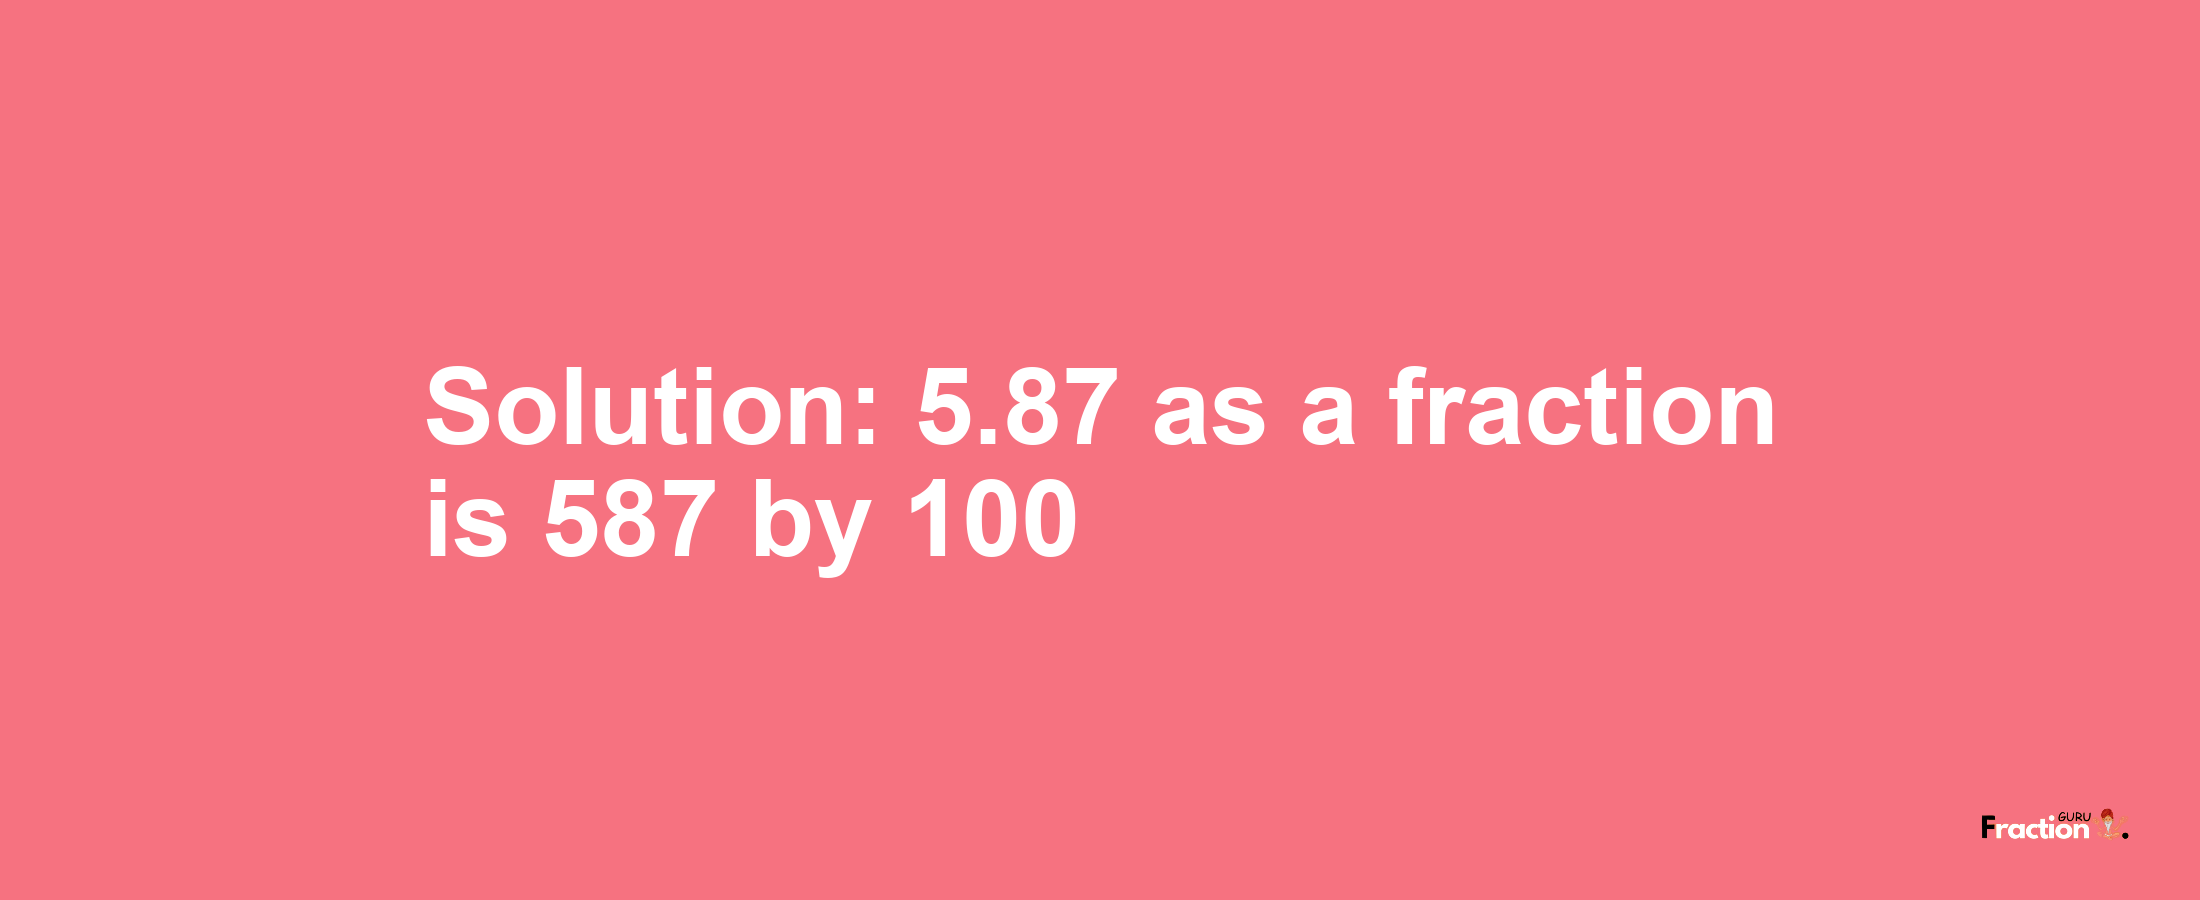 Solution:5.87 as a fraction is 587/100